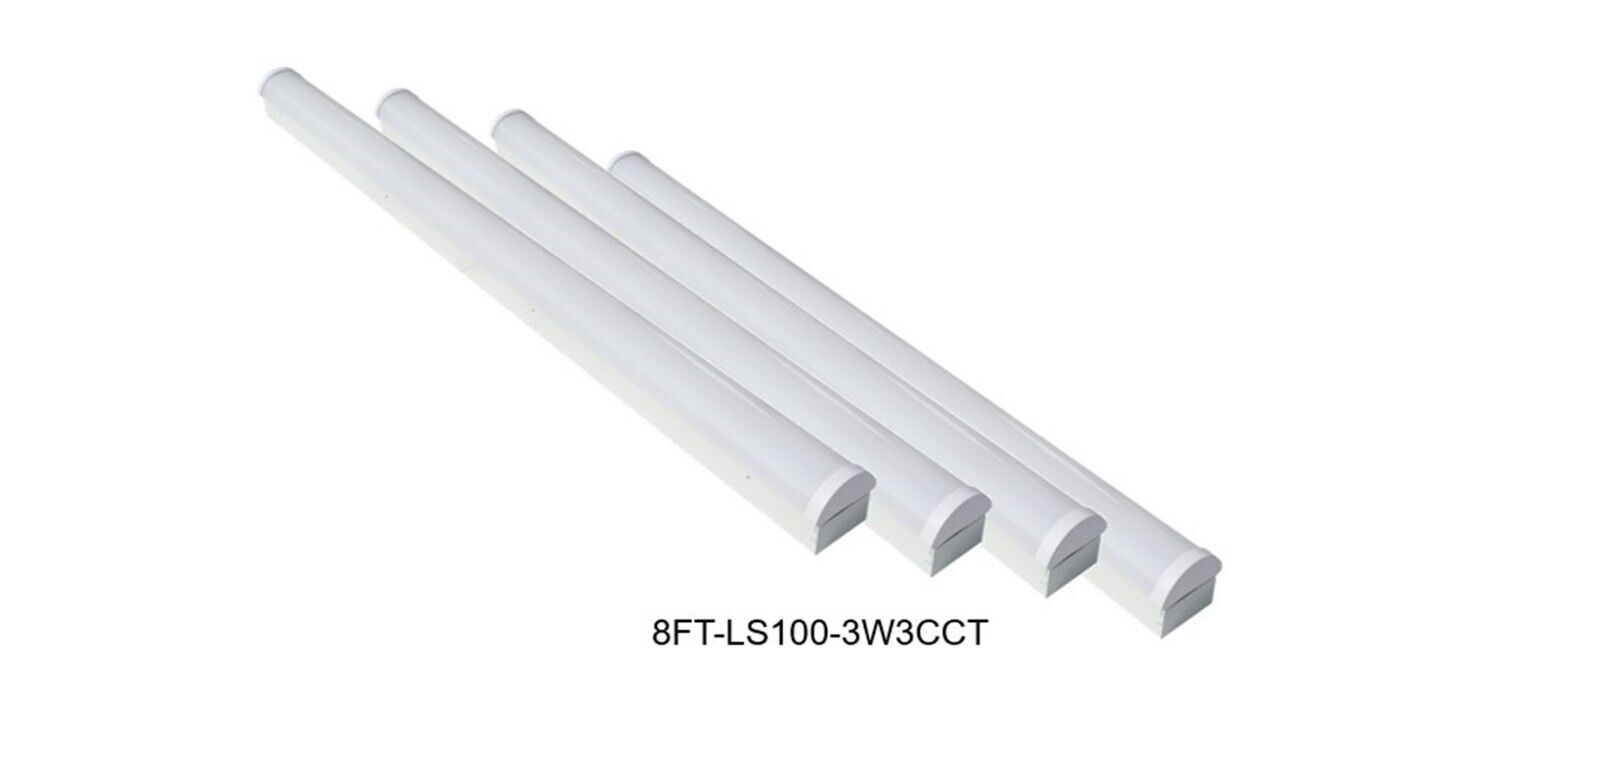 4 Pack 8FT LED Linear Strip 60/50/40W 5200/6500/7800lm Selectable